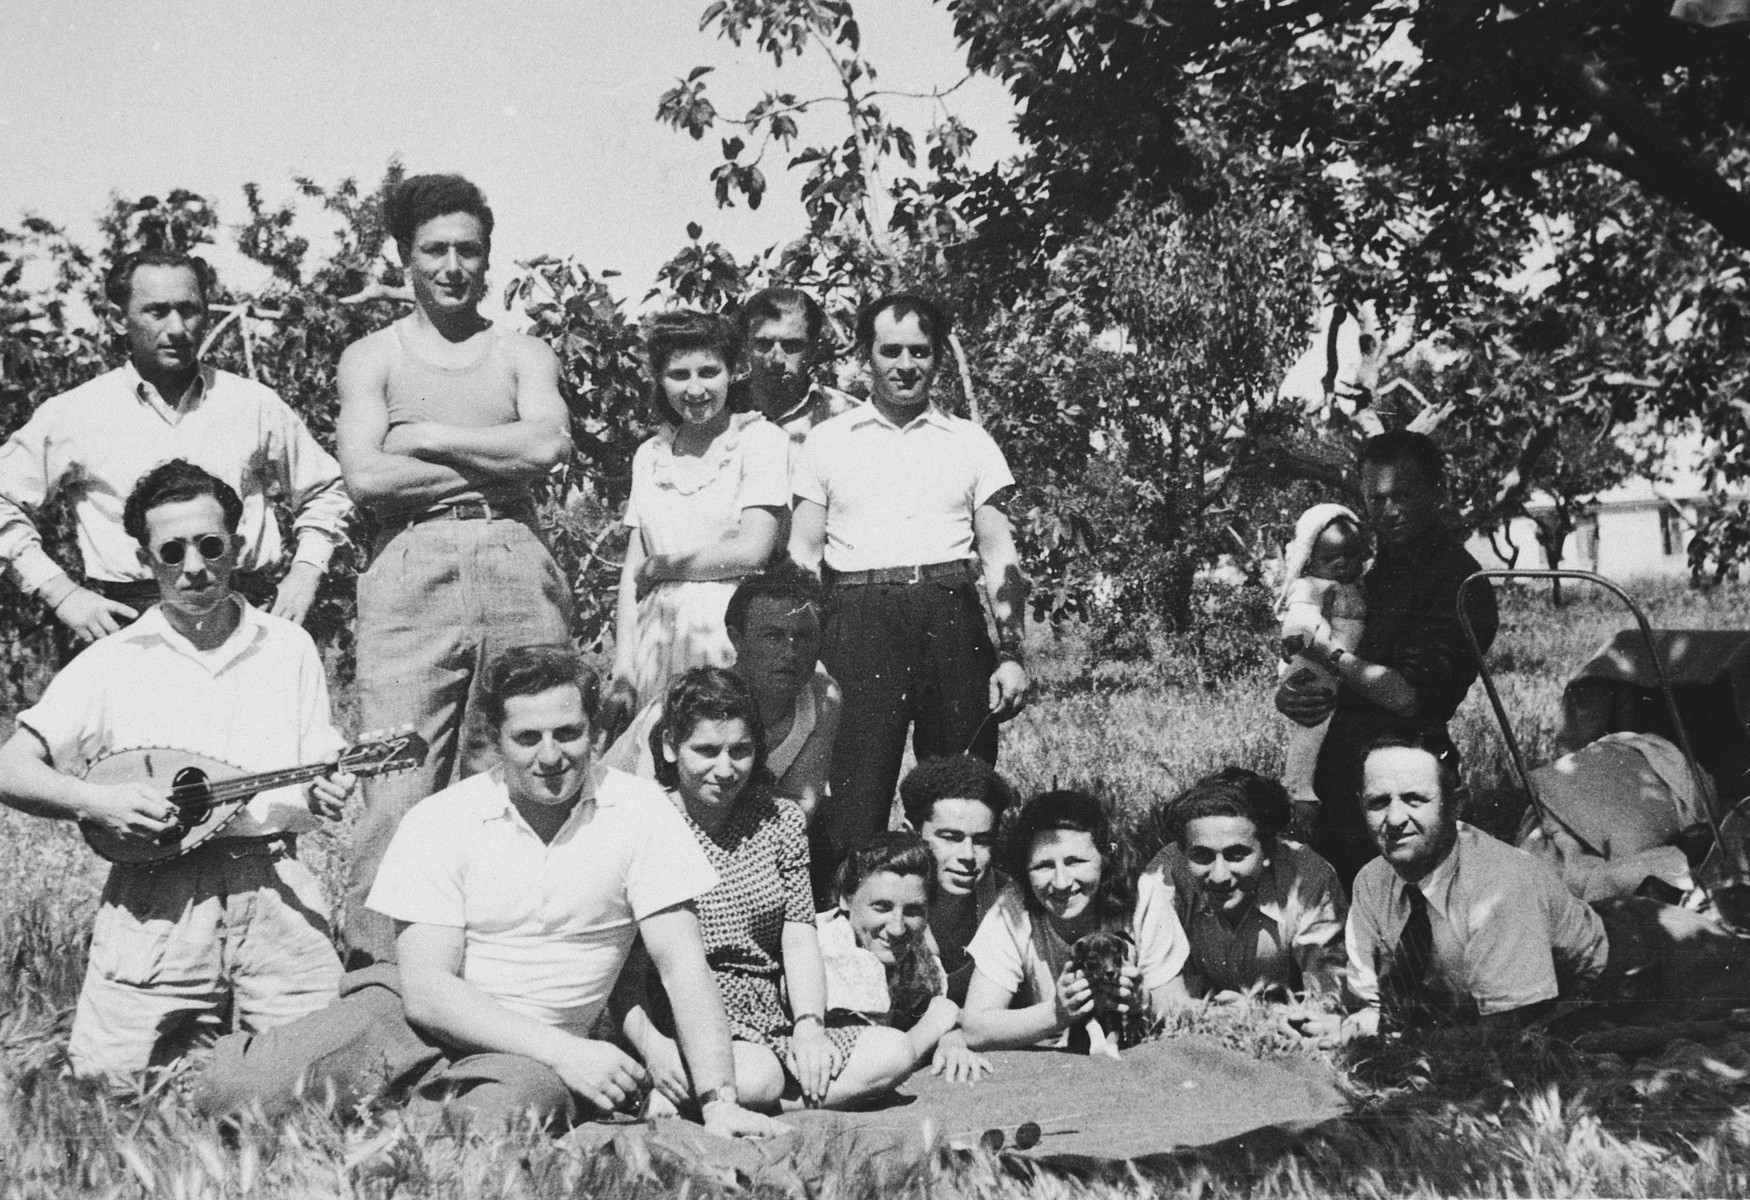 Jewish youth pose for a group portrait during an outdoor social gathering in the Bari displaced persons' camp.